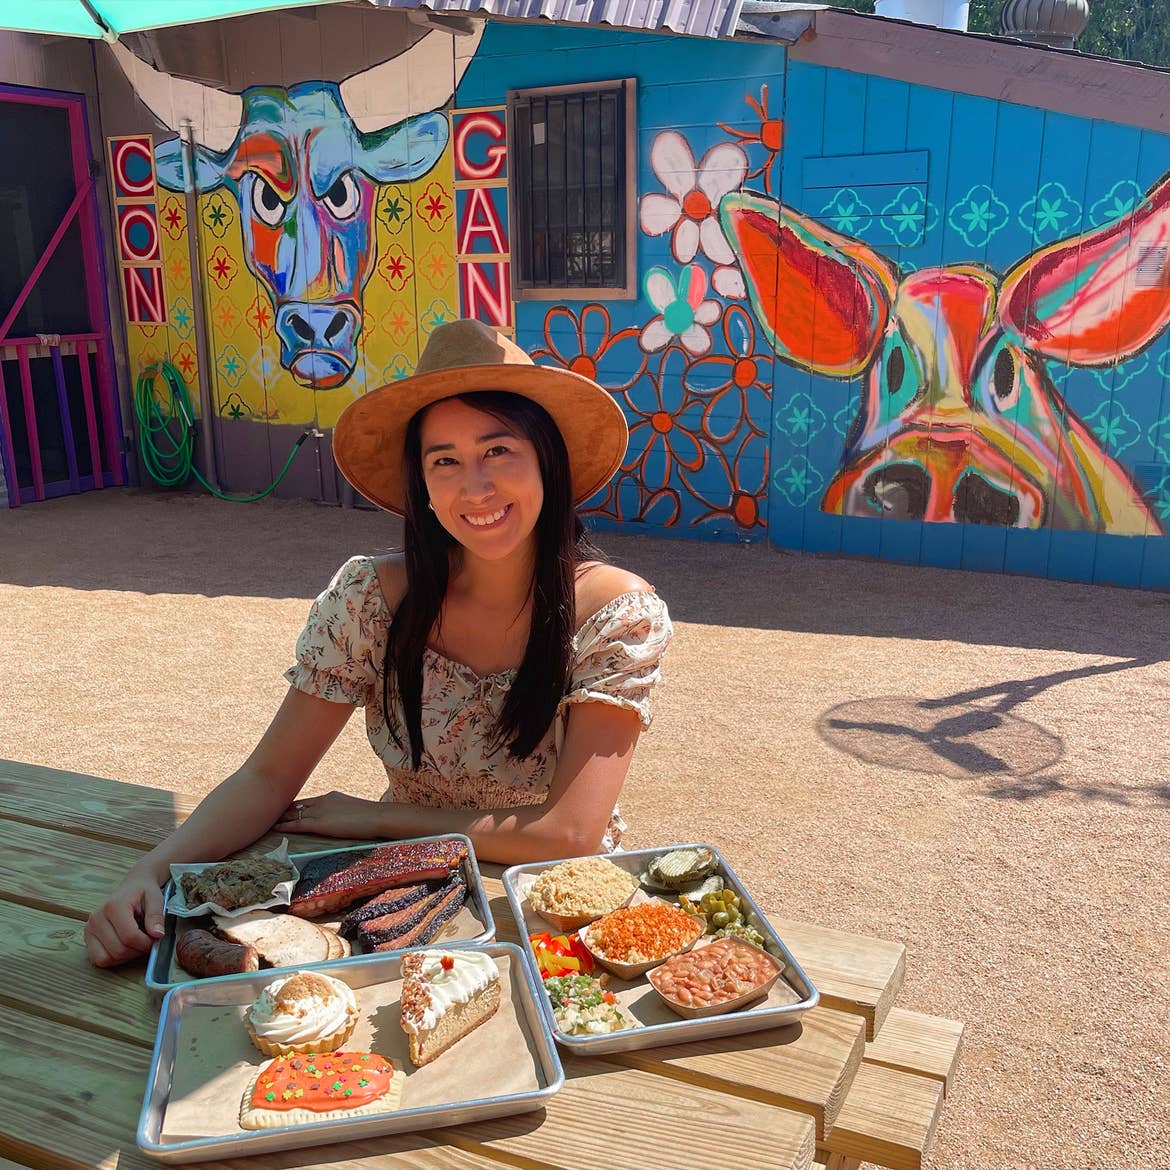 A woman in a floral sundress and sun hat sits at a wooden table with a serving tray containing barbecue dishes and sides with a painted mural of livestock behind her.